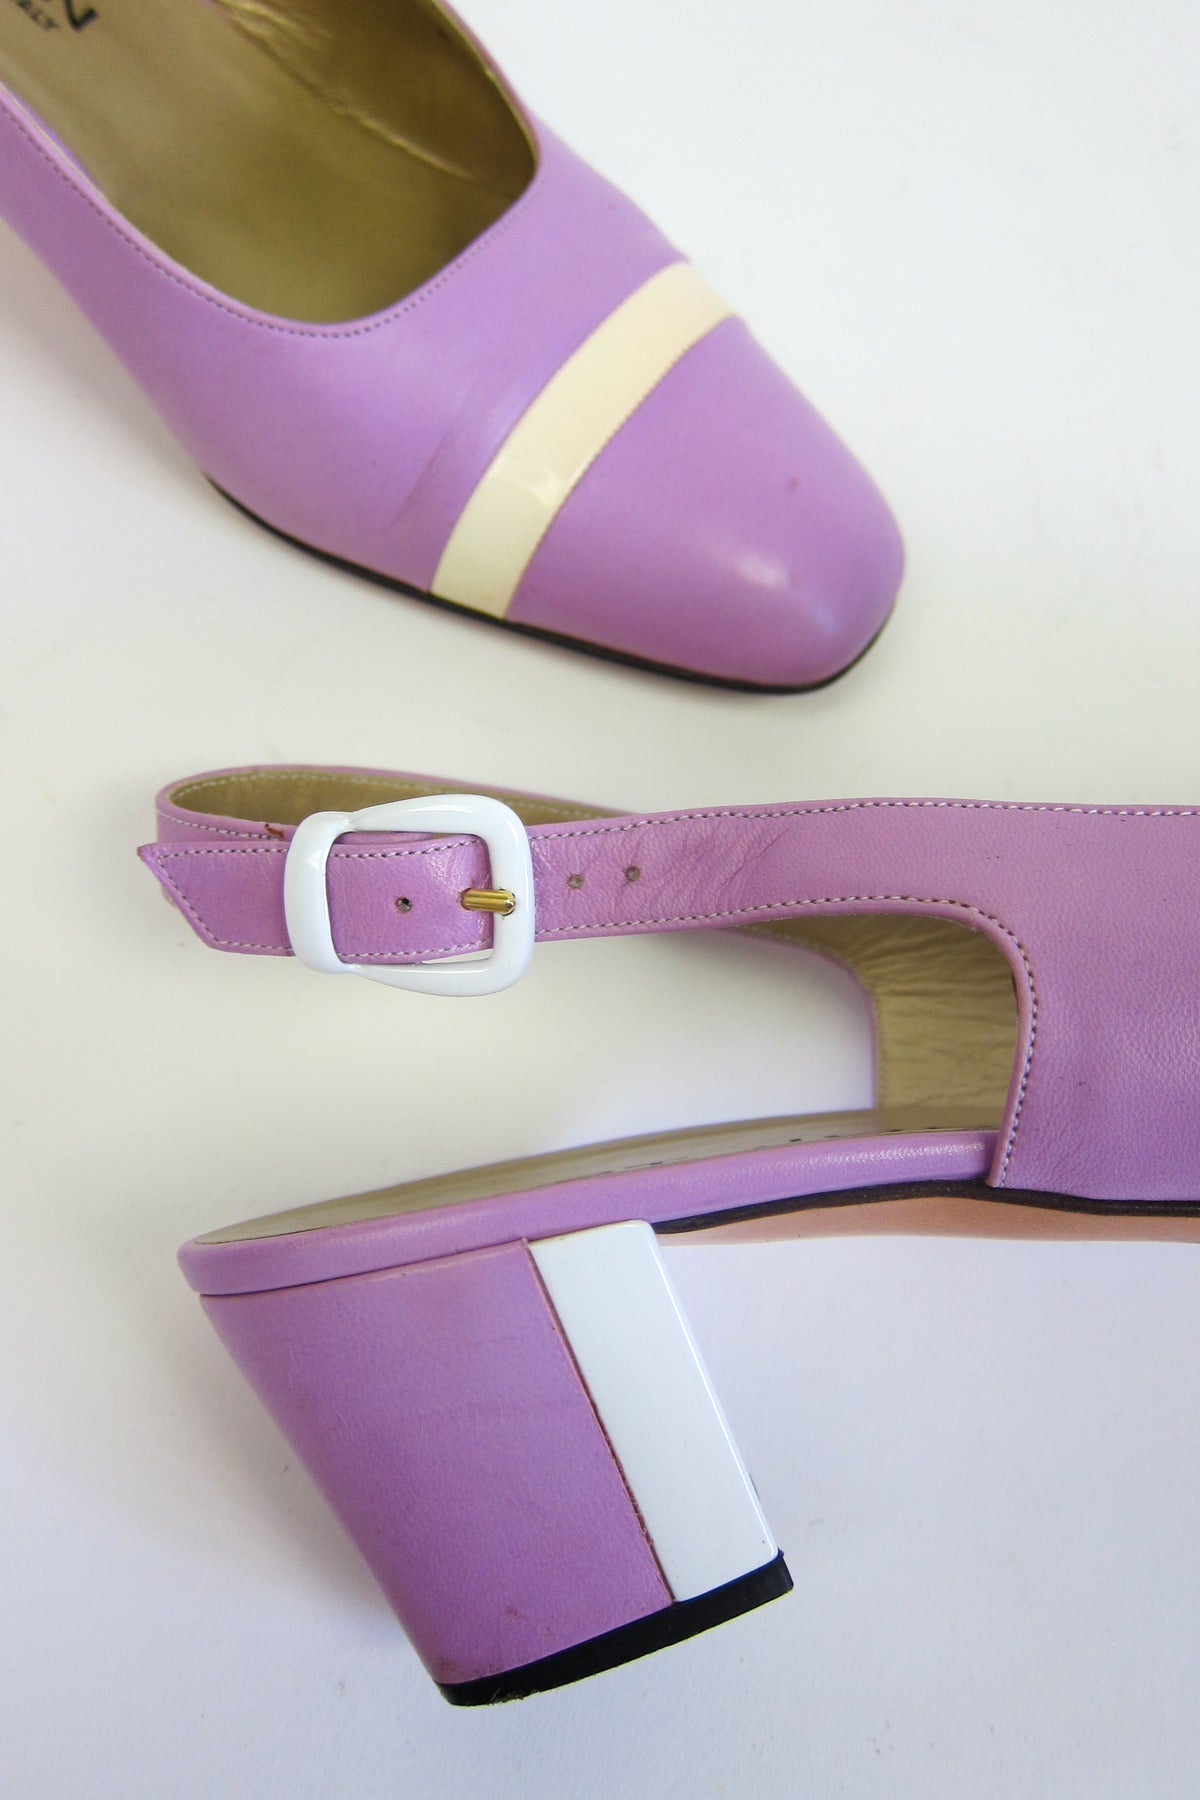 Lilac Leather Pumps by St. John